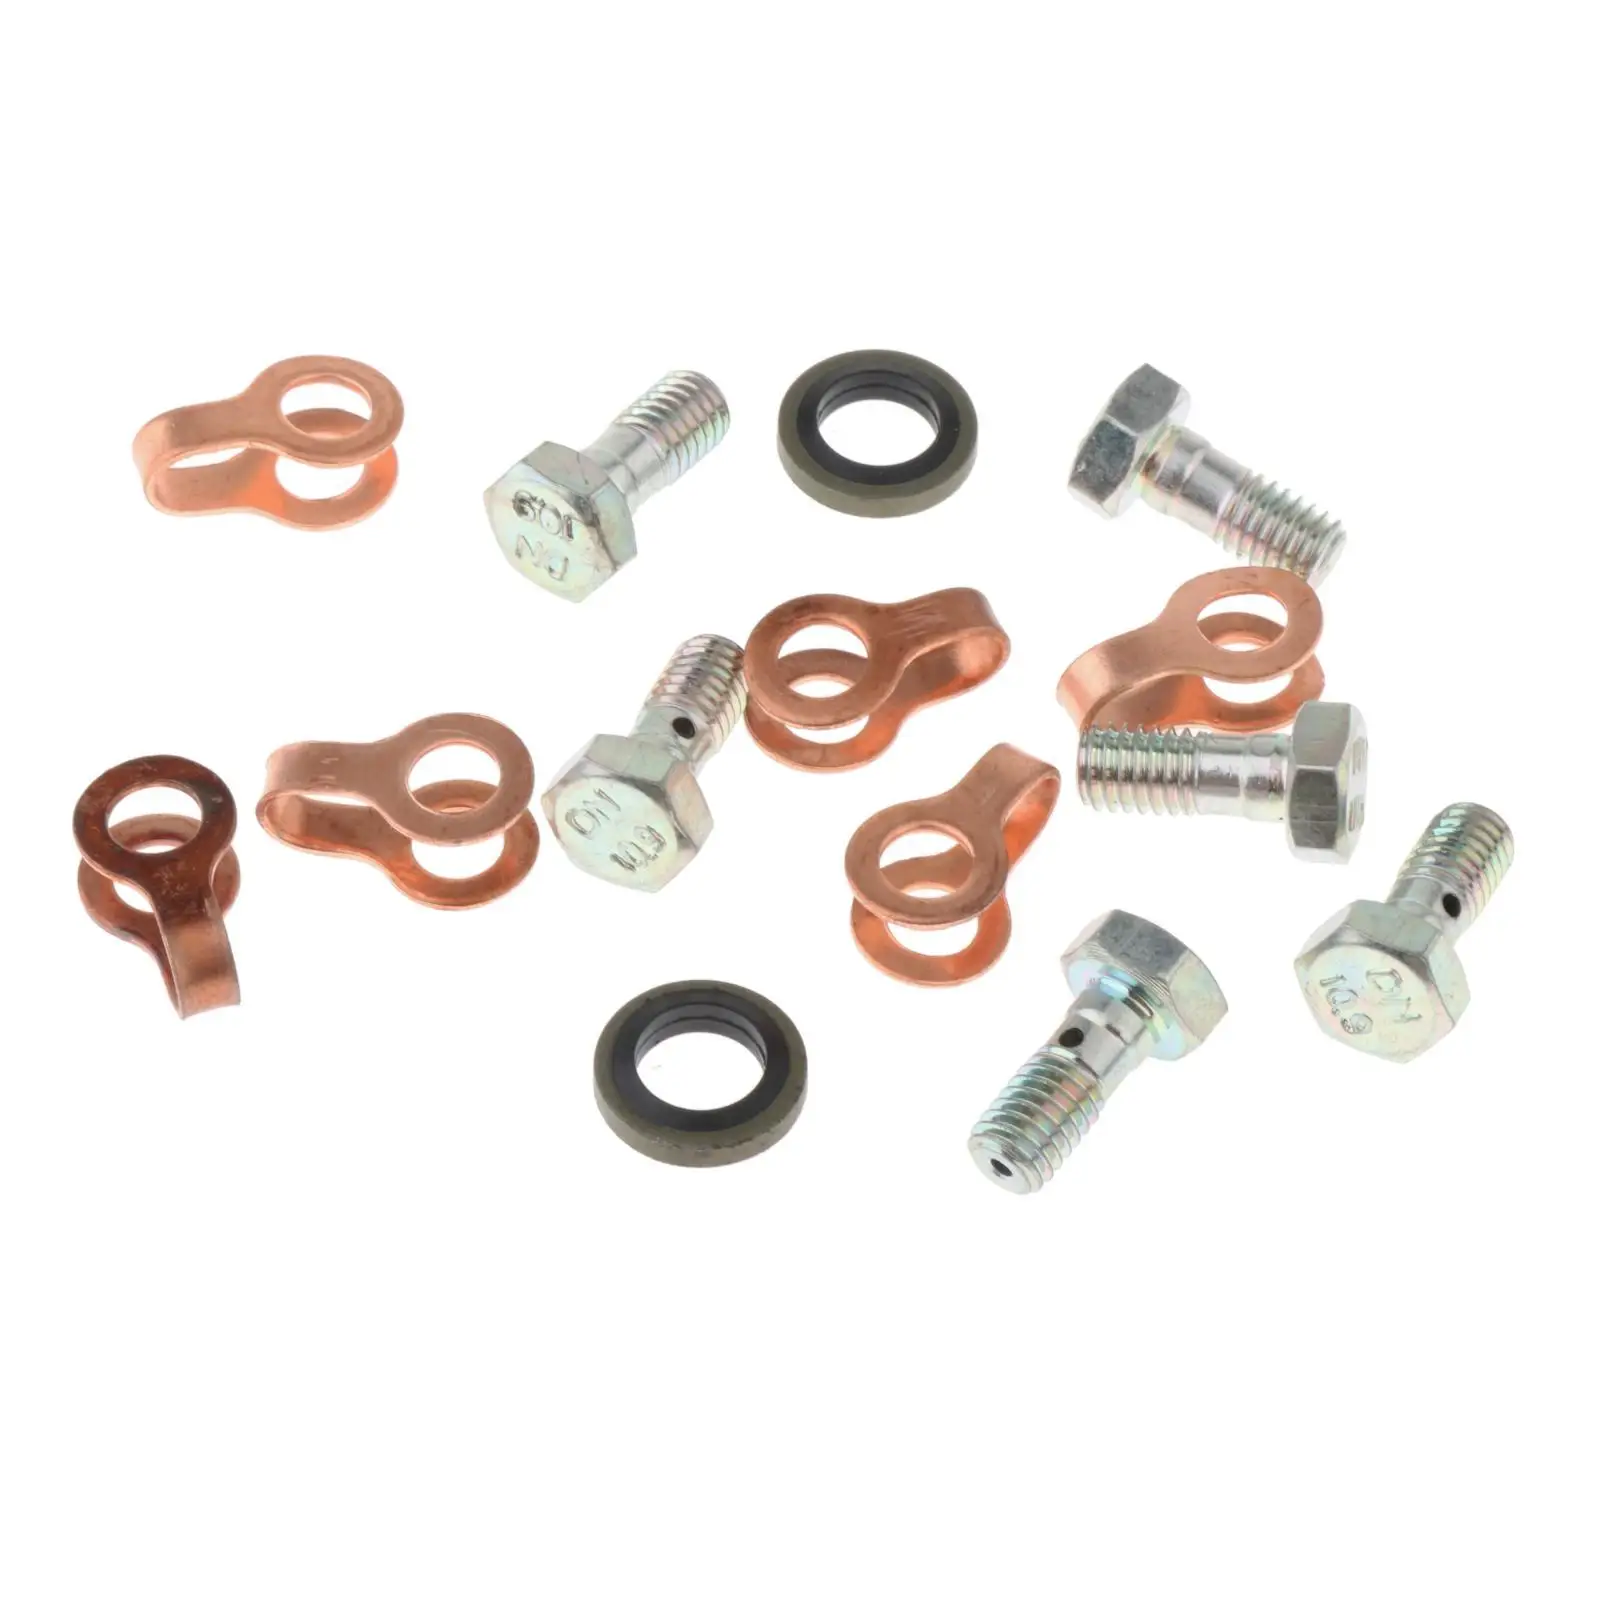 Fuel Return Line Banjo Bolts Replacement Accessories Automotive Bolts and Gasket Repairing Set for Industrial 12V Engines